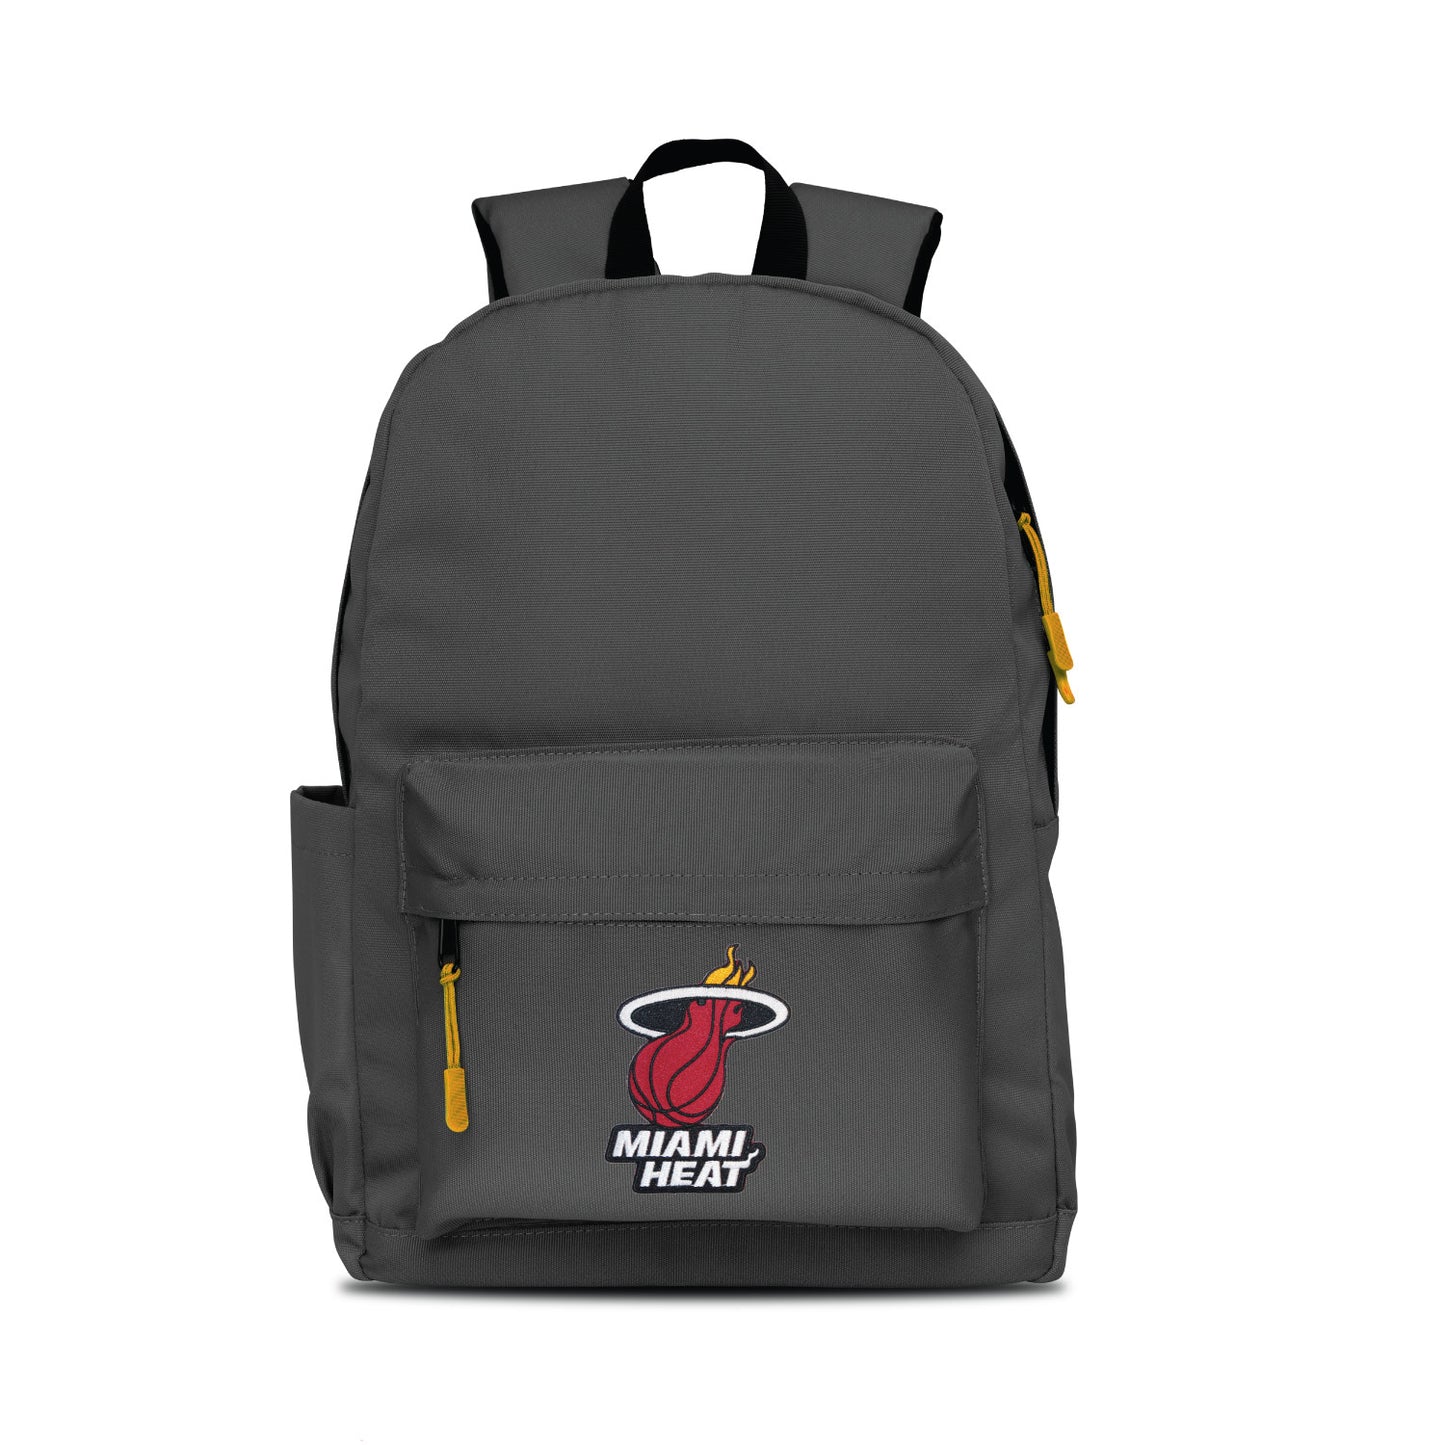 Miami Heat Campus Laptop Backpack - Gray